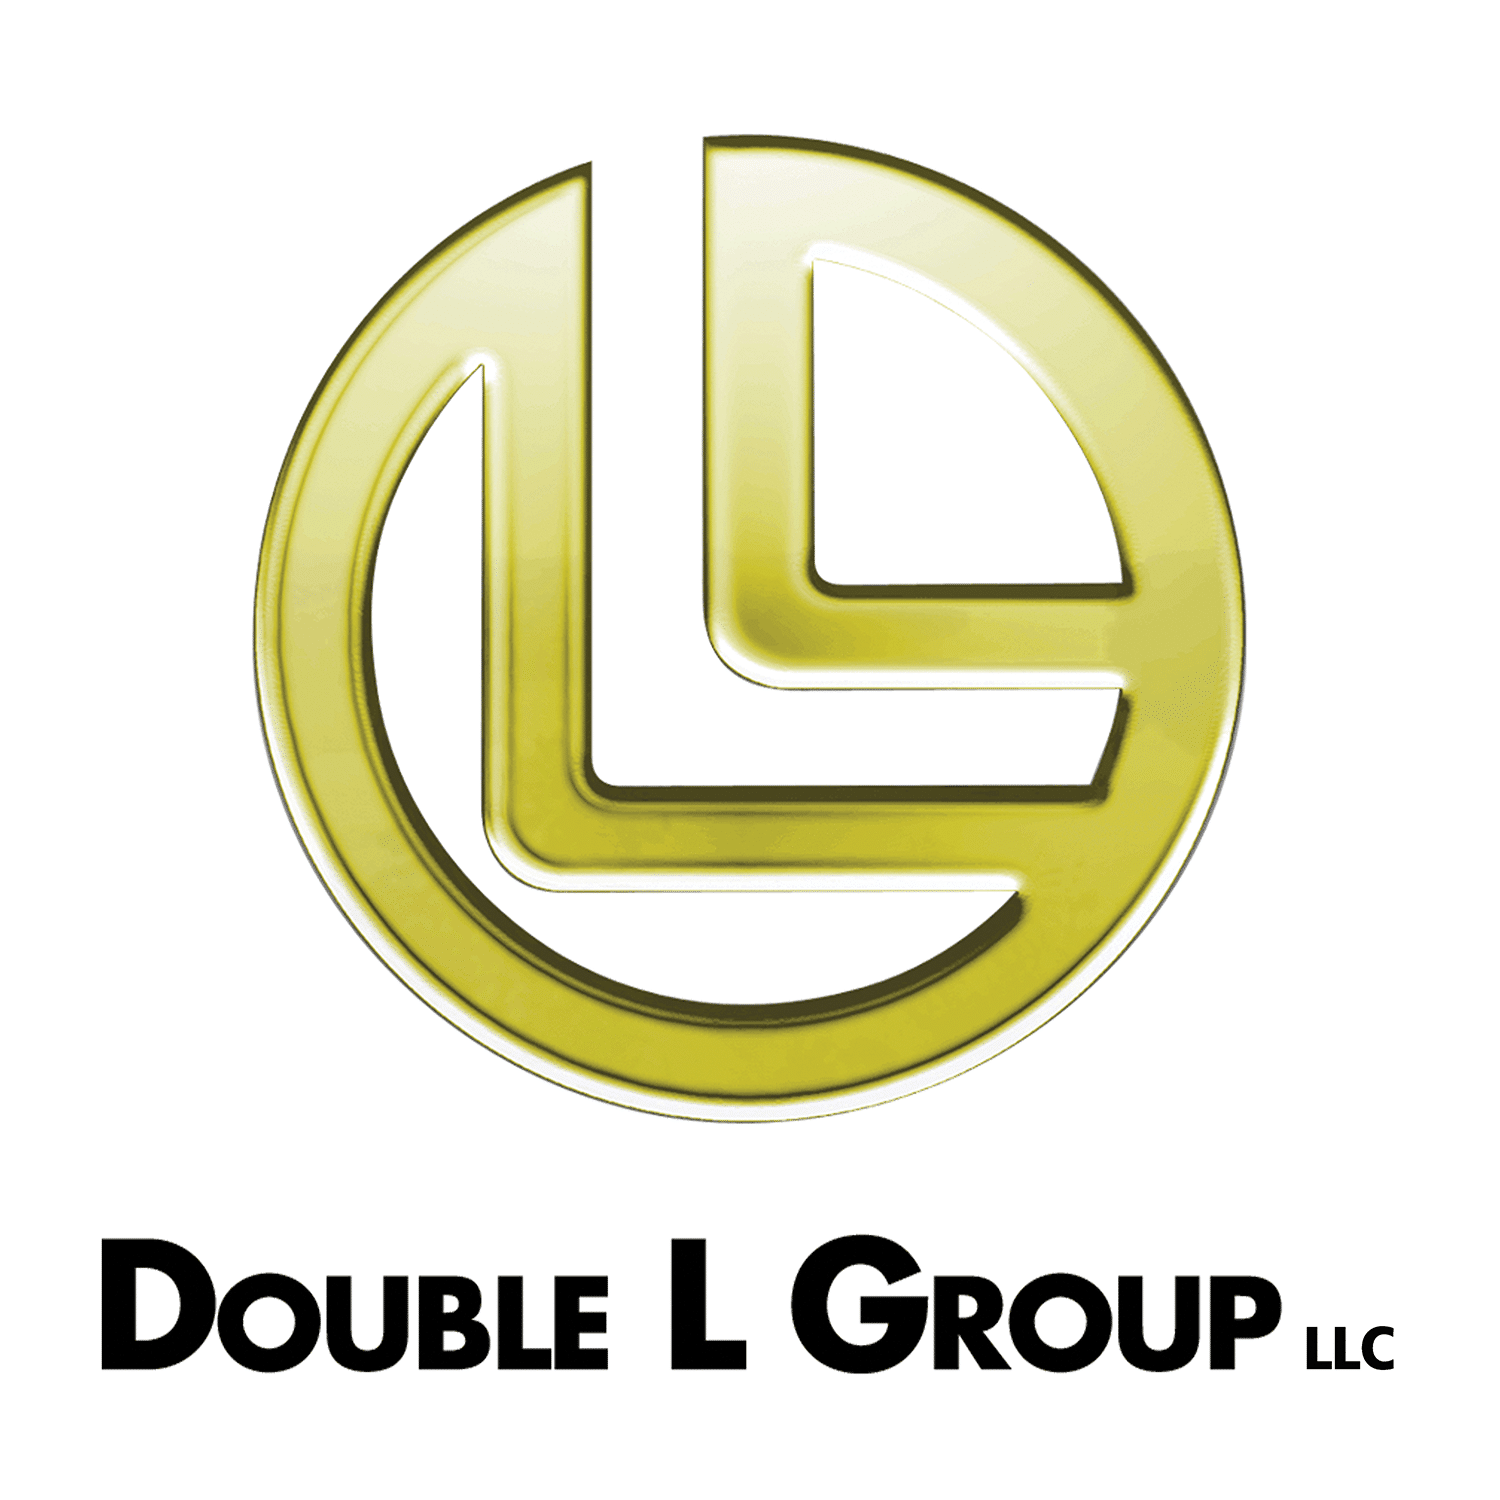 Double L Logo - Double L. Poultry and Swine Ventilation and Flooring Products